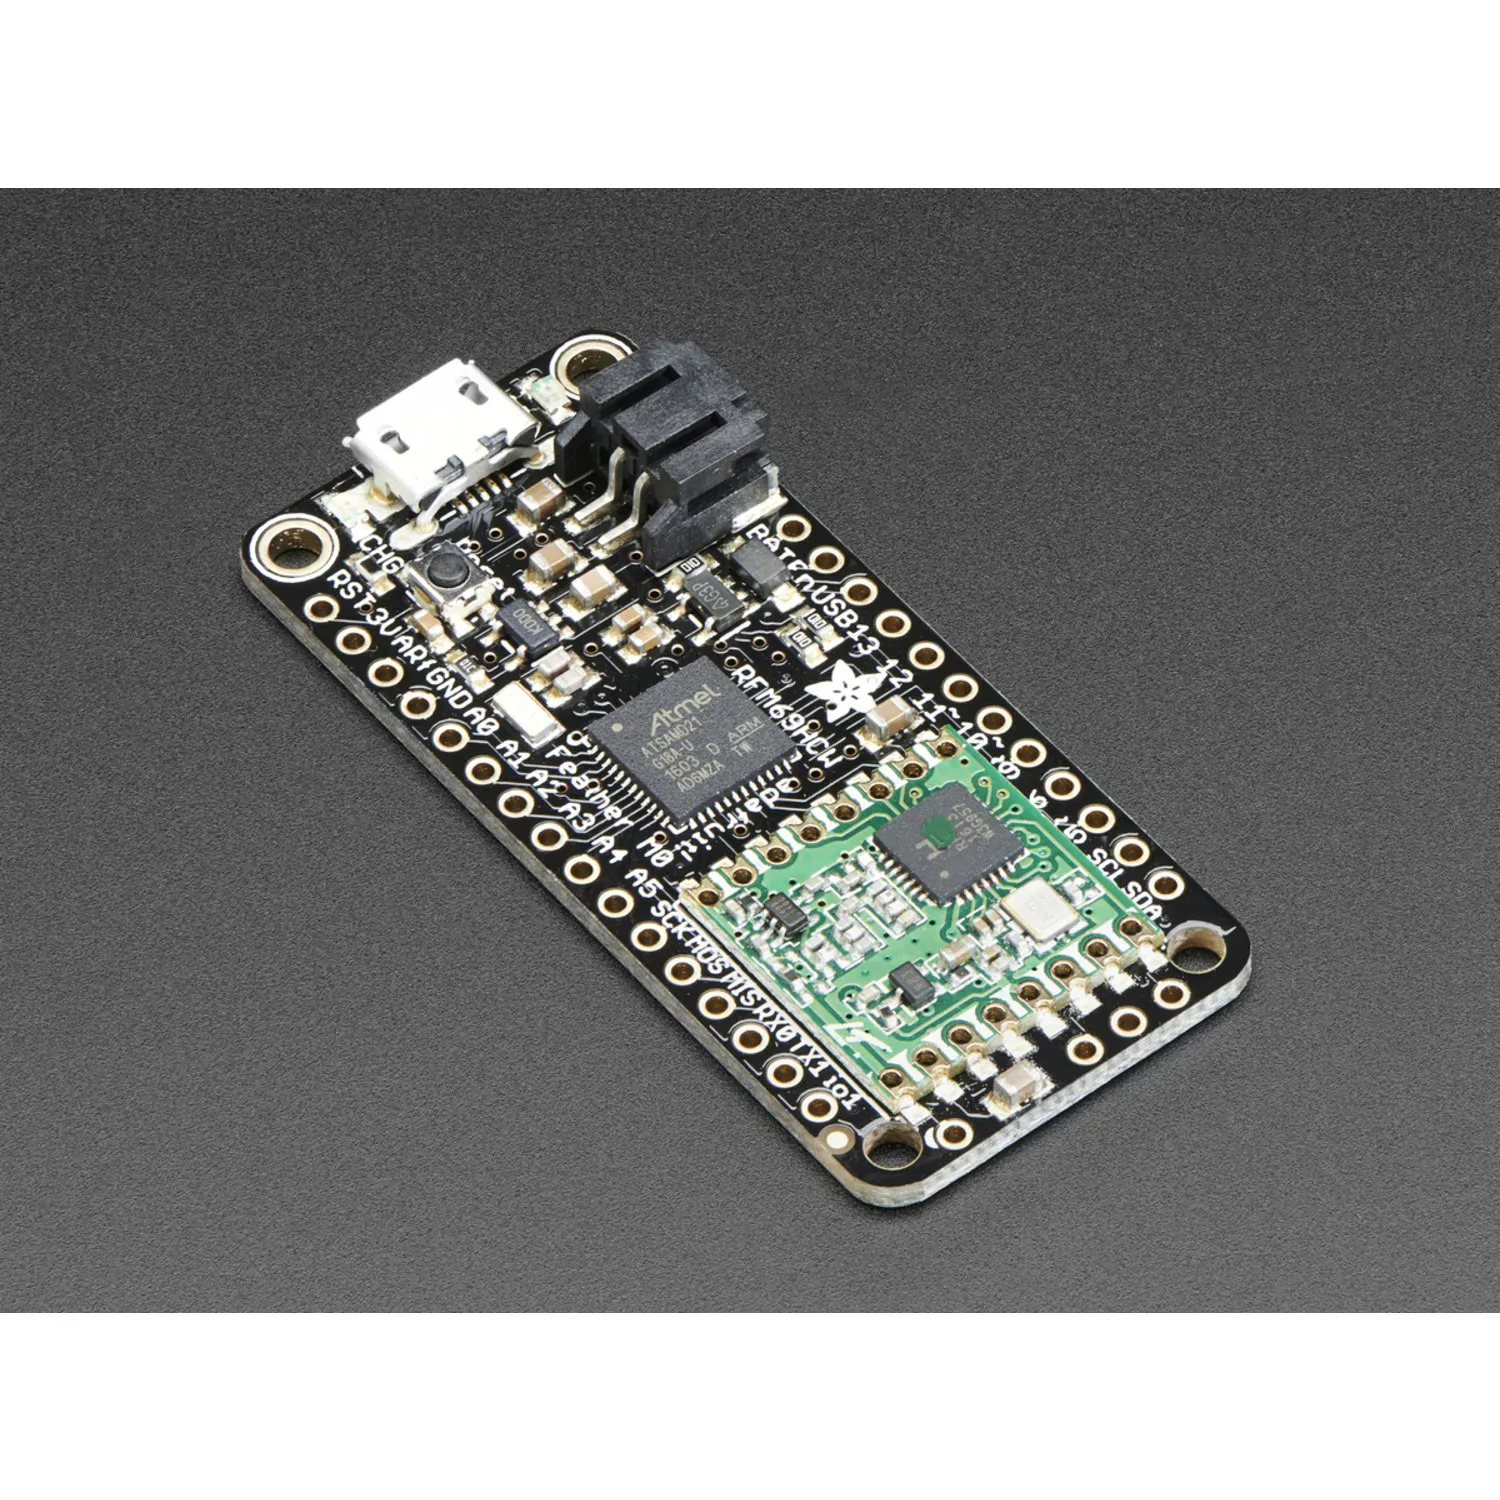 Photo of Adafruit Feather M0 RFM69HCW Packet Radio - 868 or 915 MHz